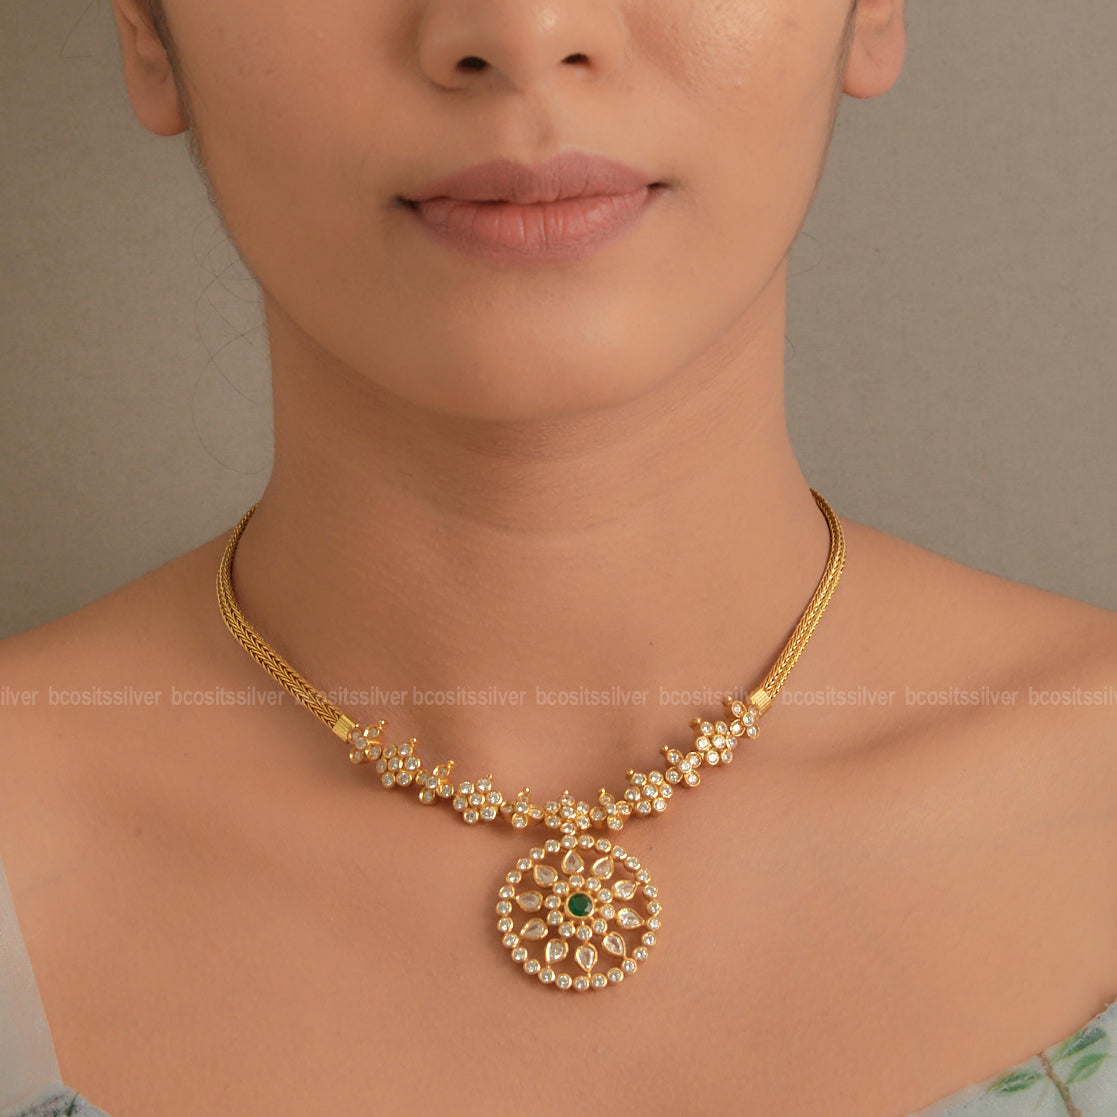 GOLD PLATED NECKPIECE - 1456 - MADE TO ORDER